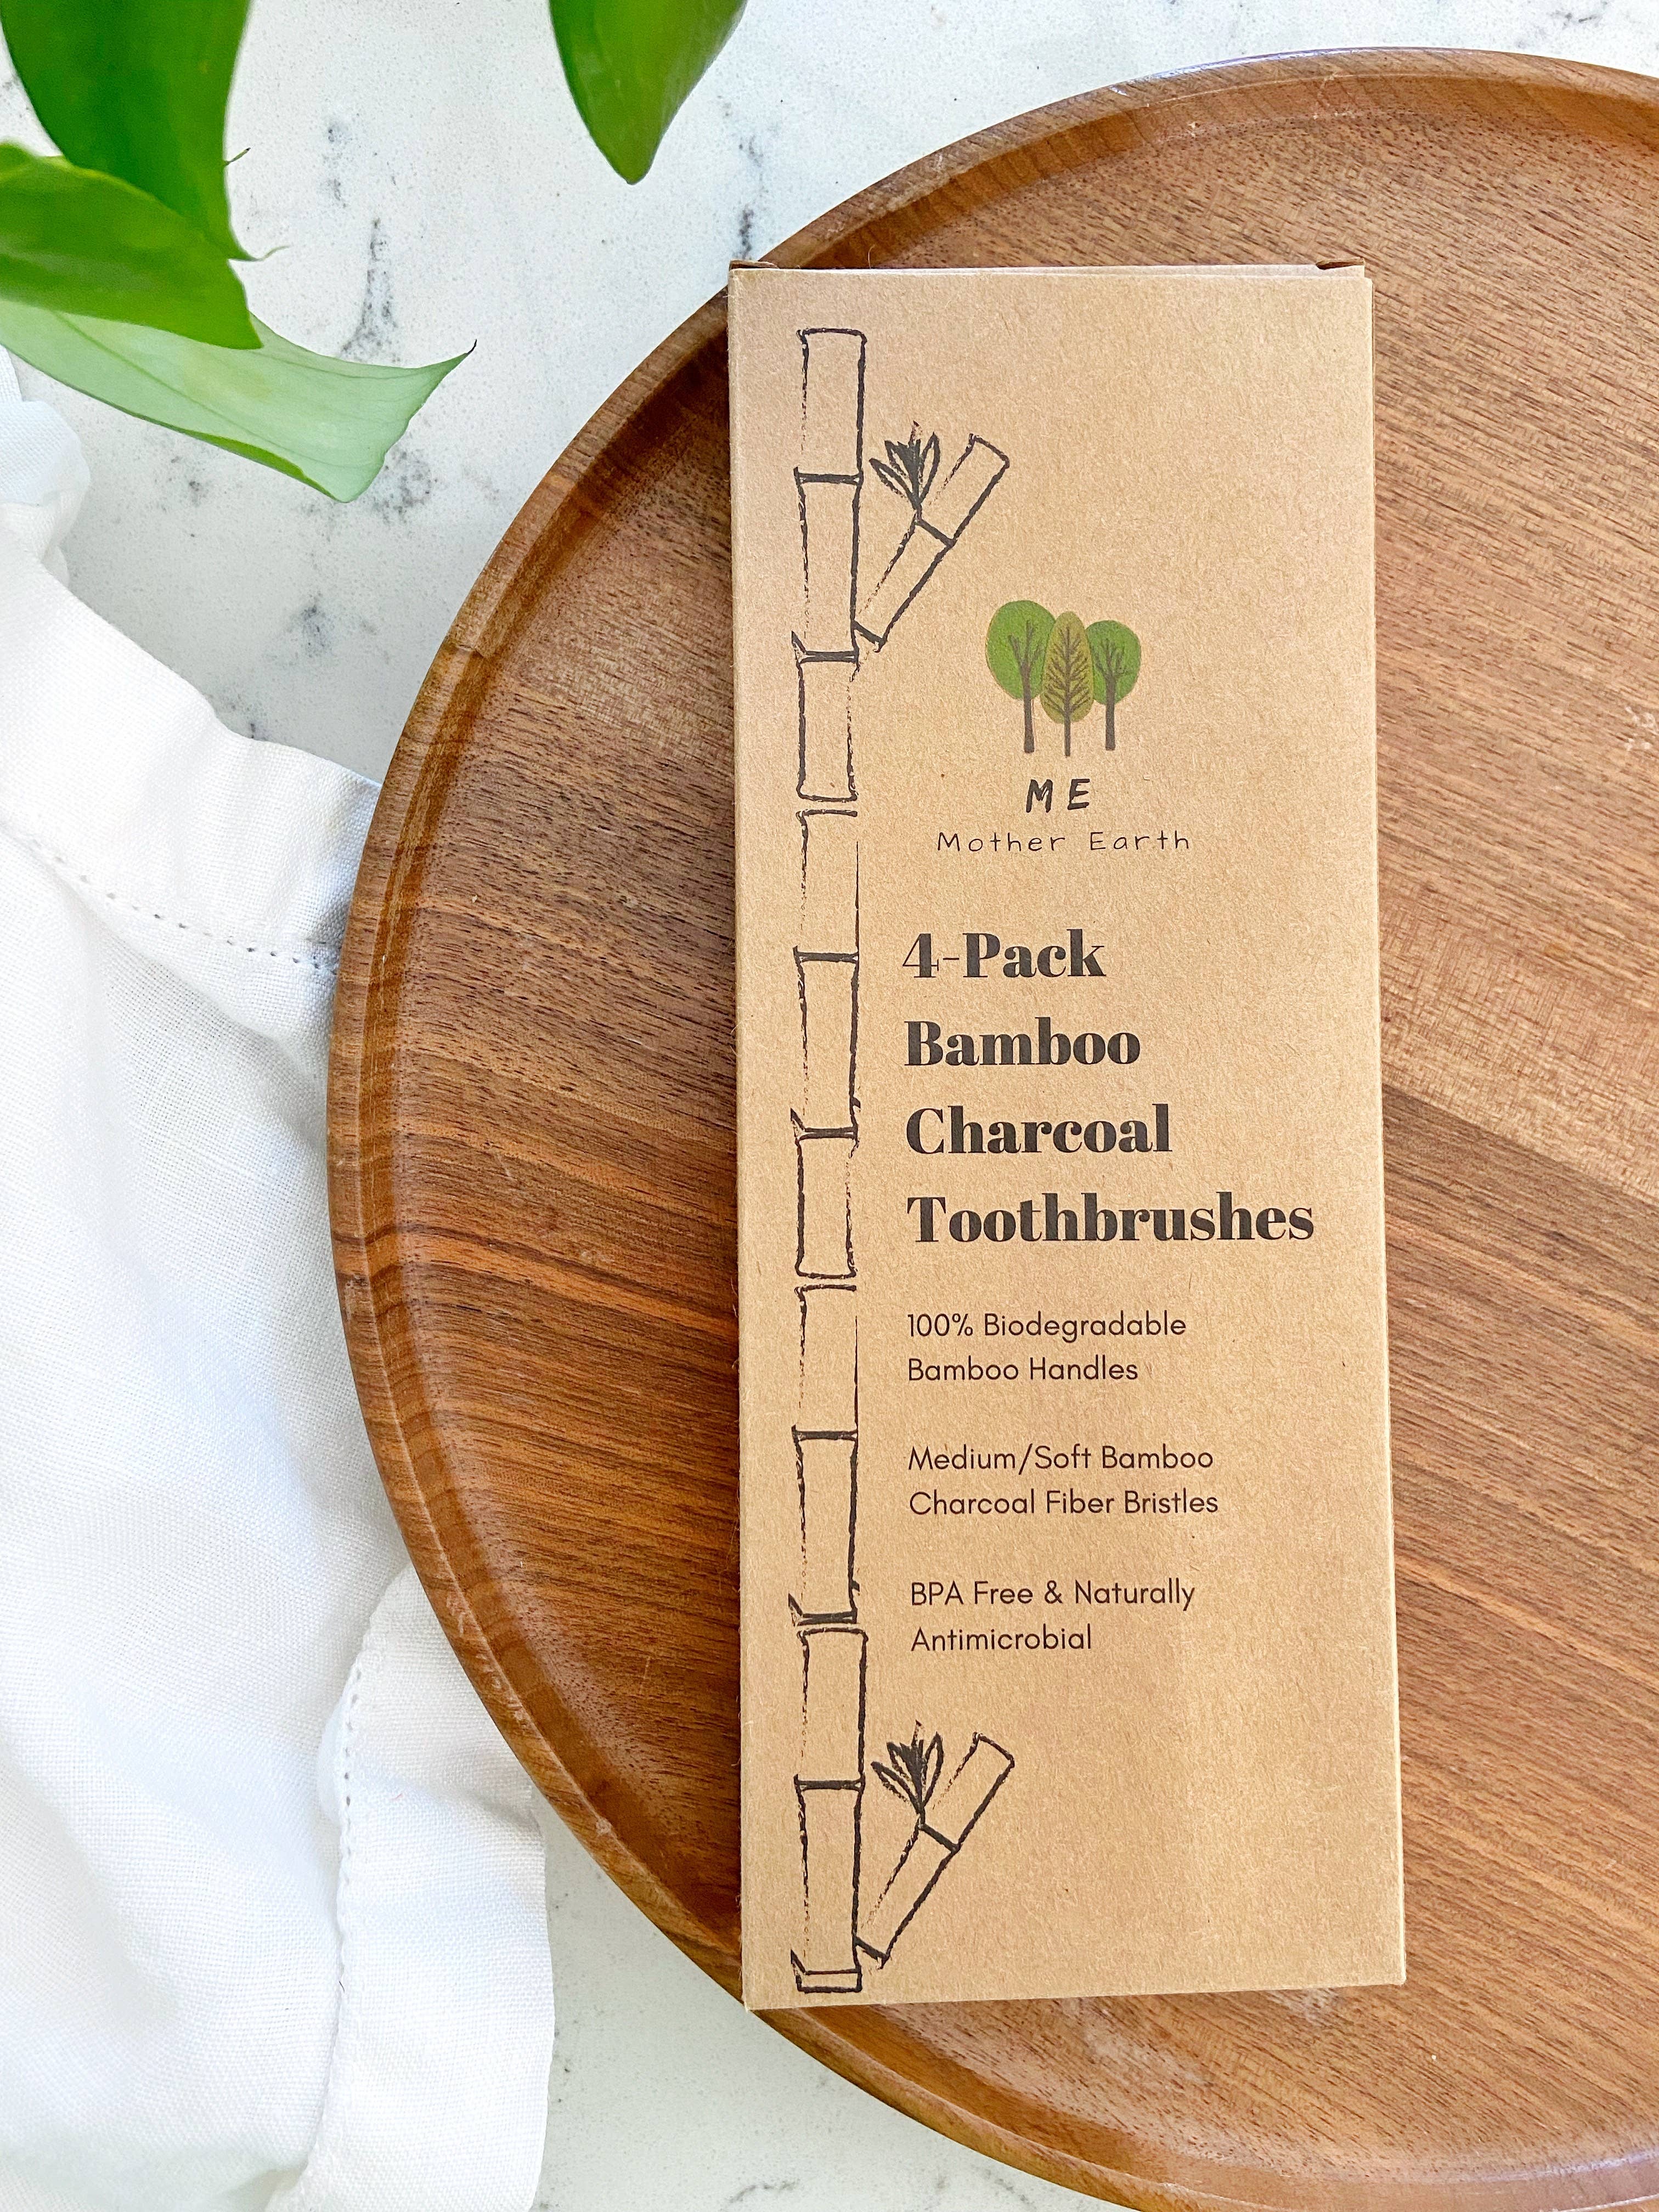 Me Mother Earth - Bamboo Charcoal Toothbrush